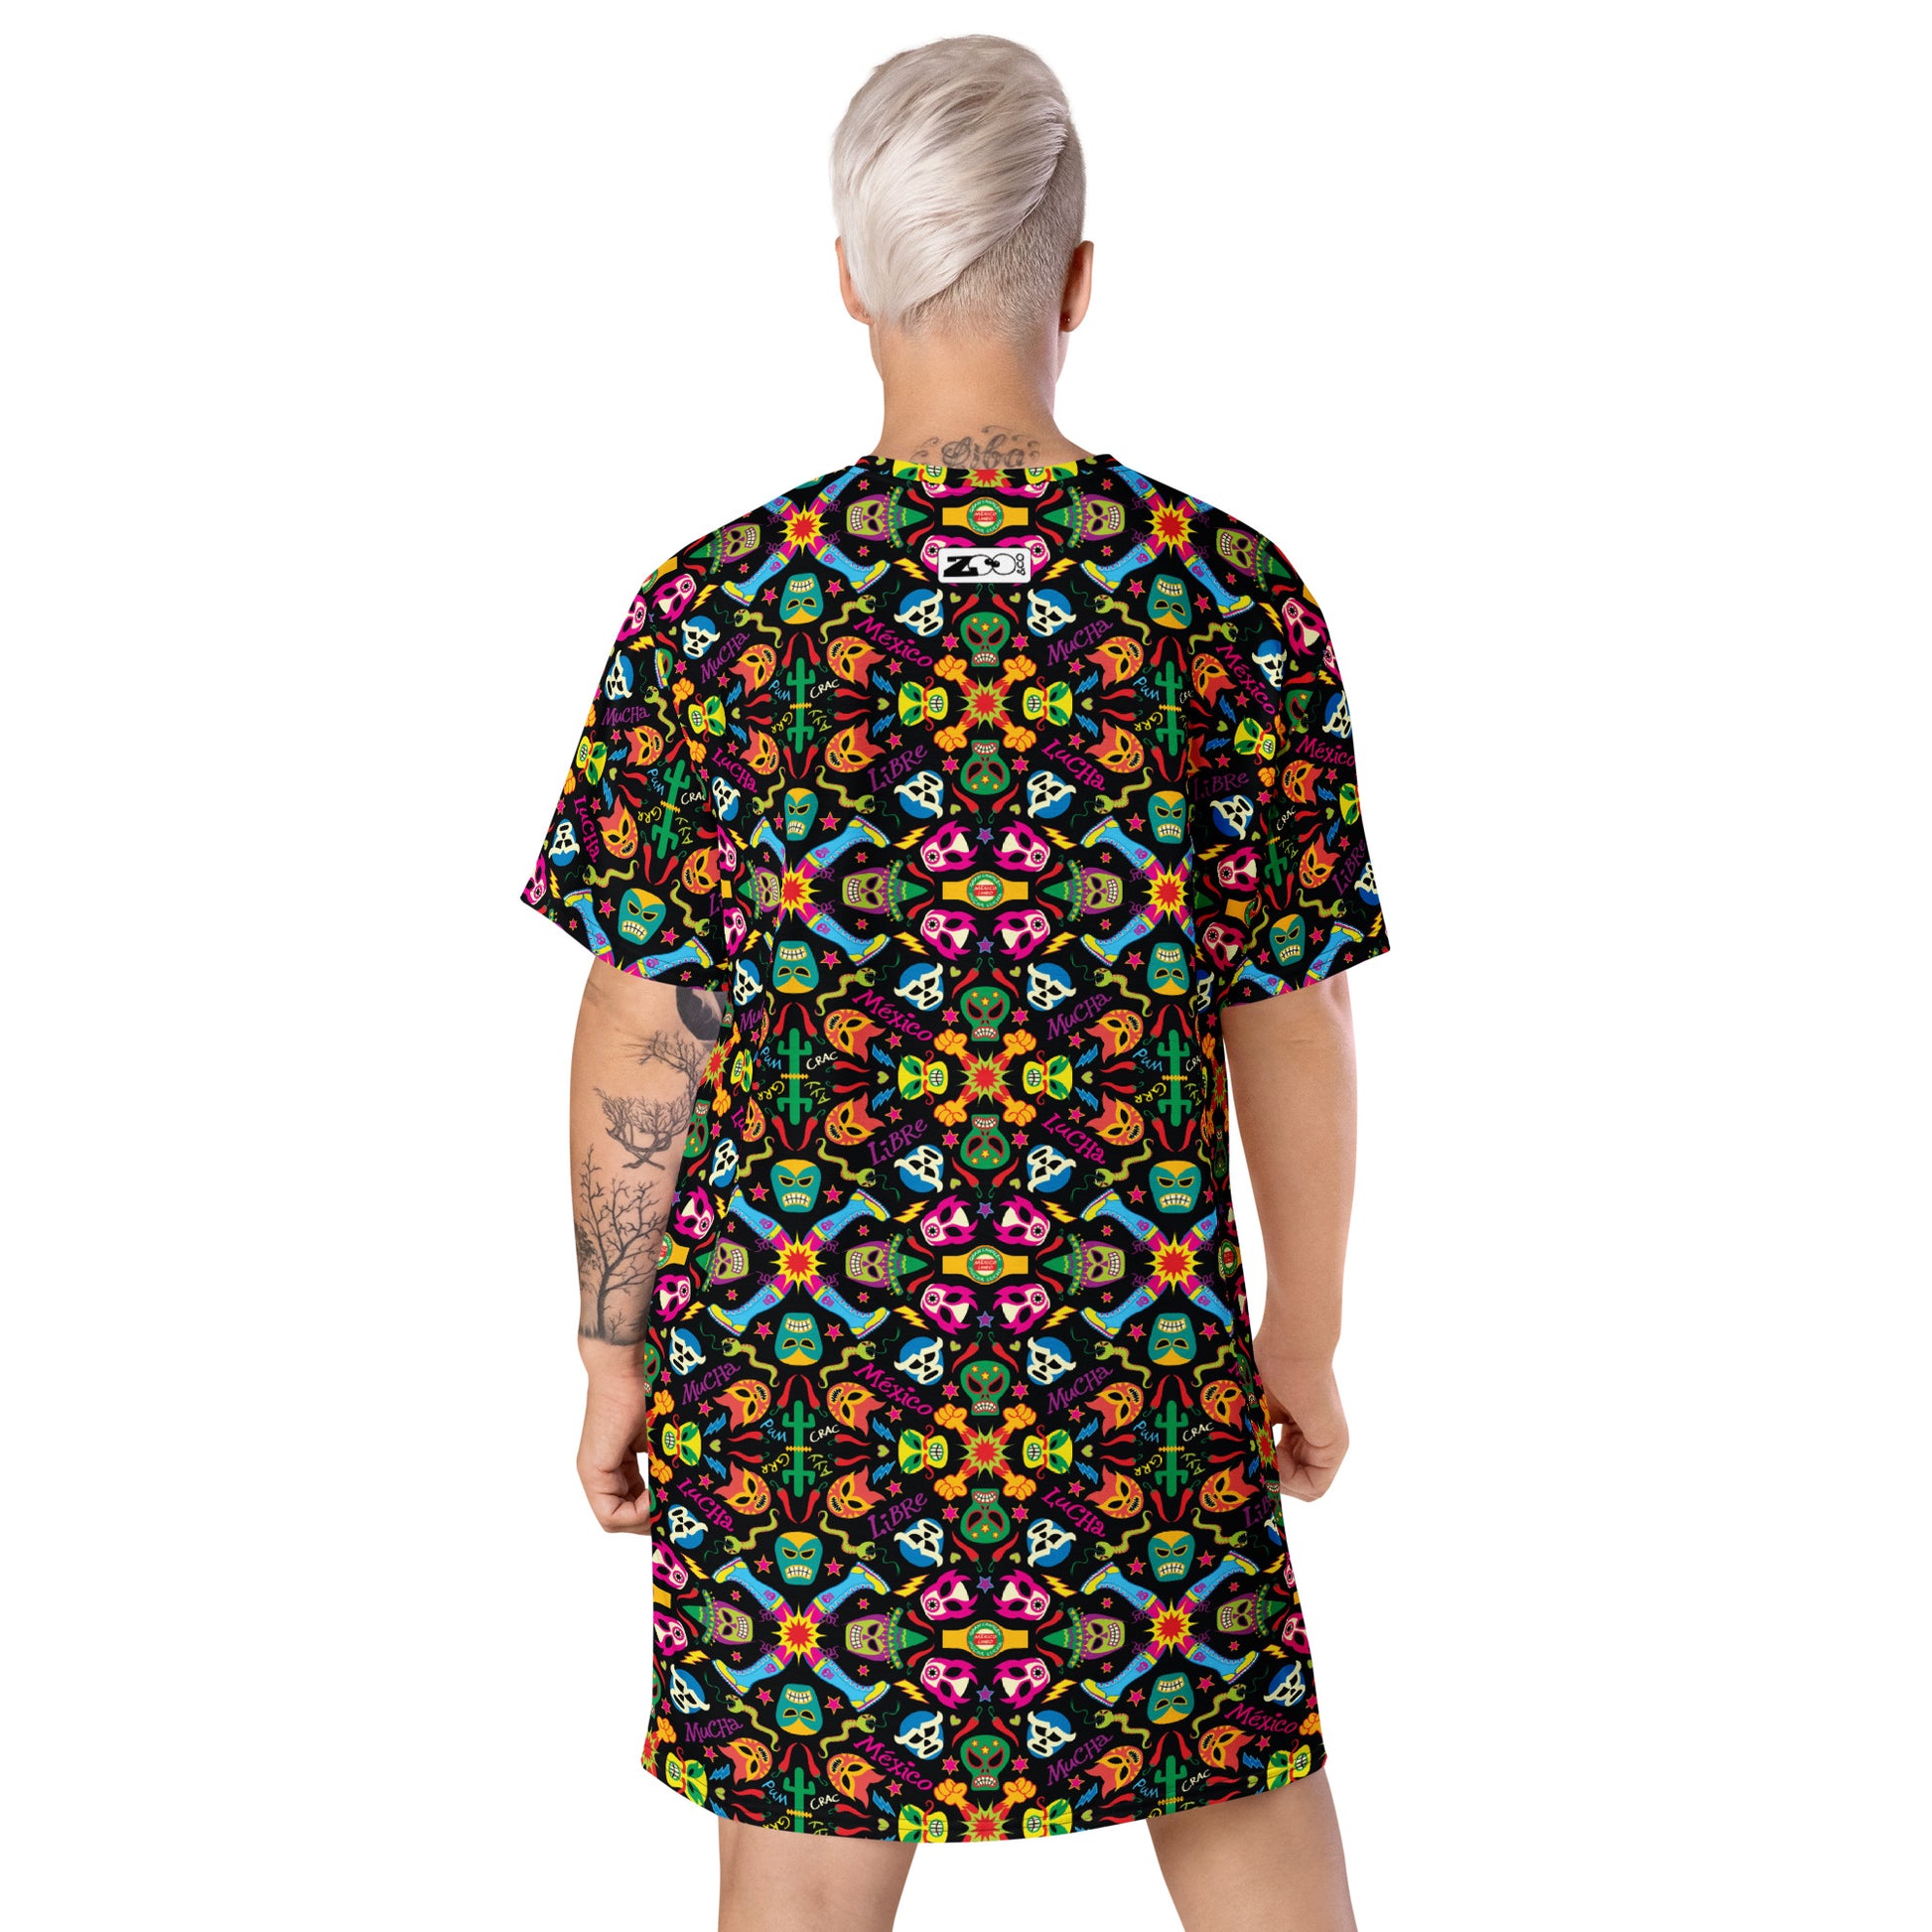 Mexican wrestling colorful party T-shirt dress. Back view